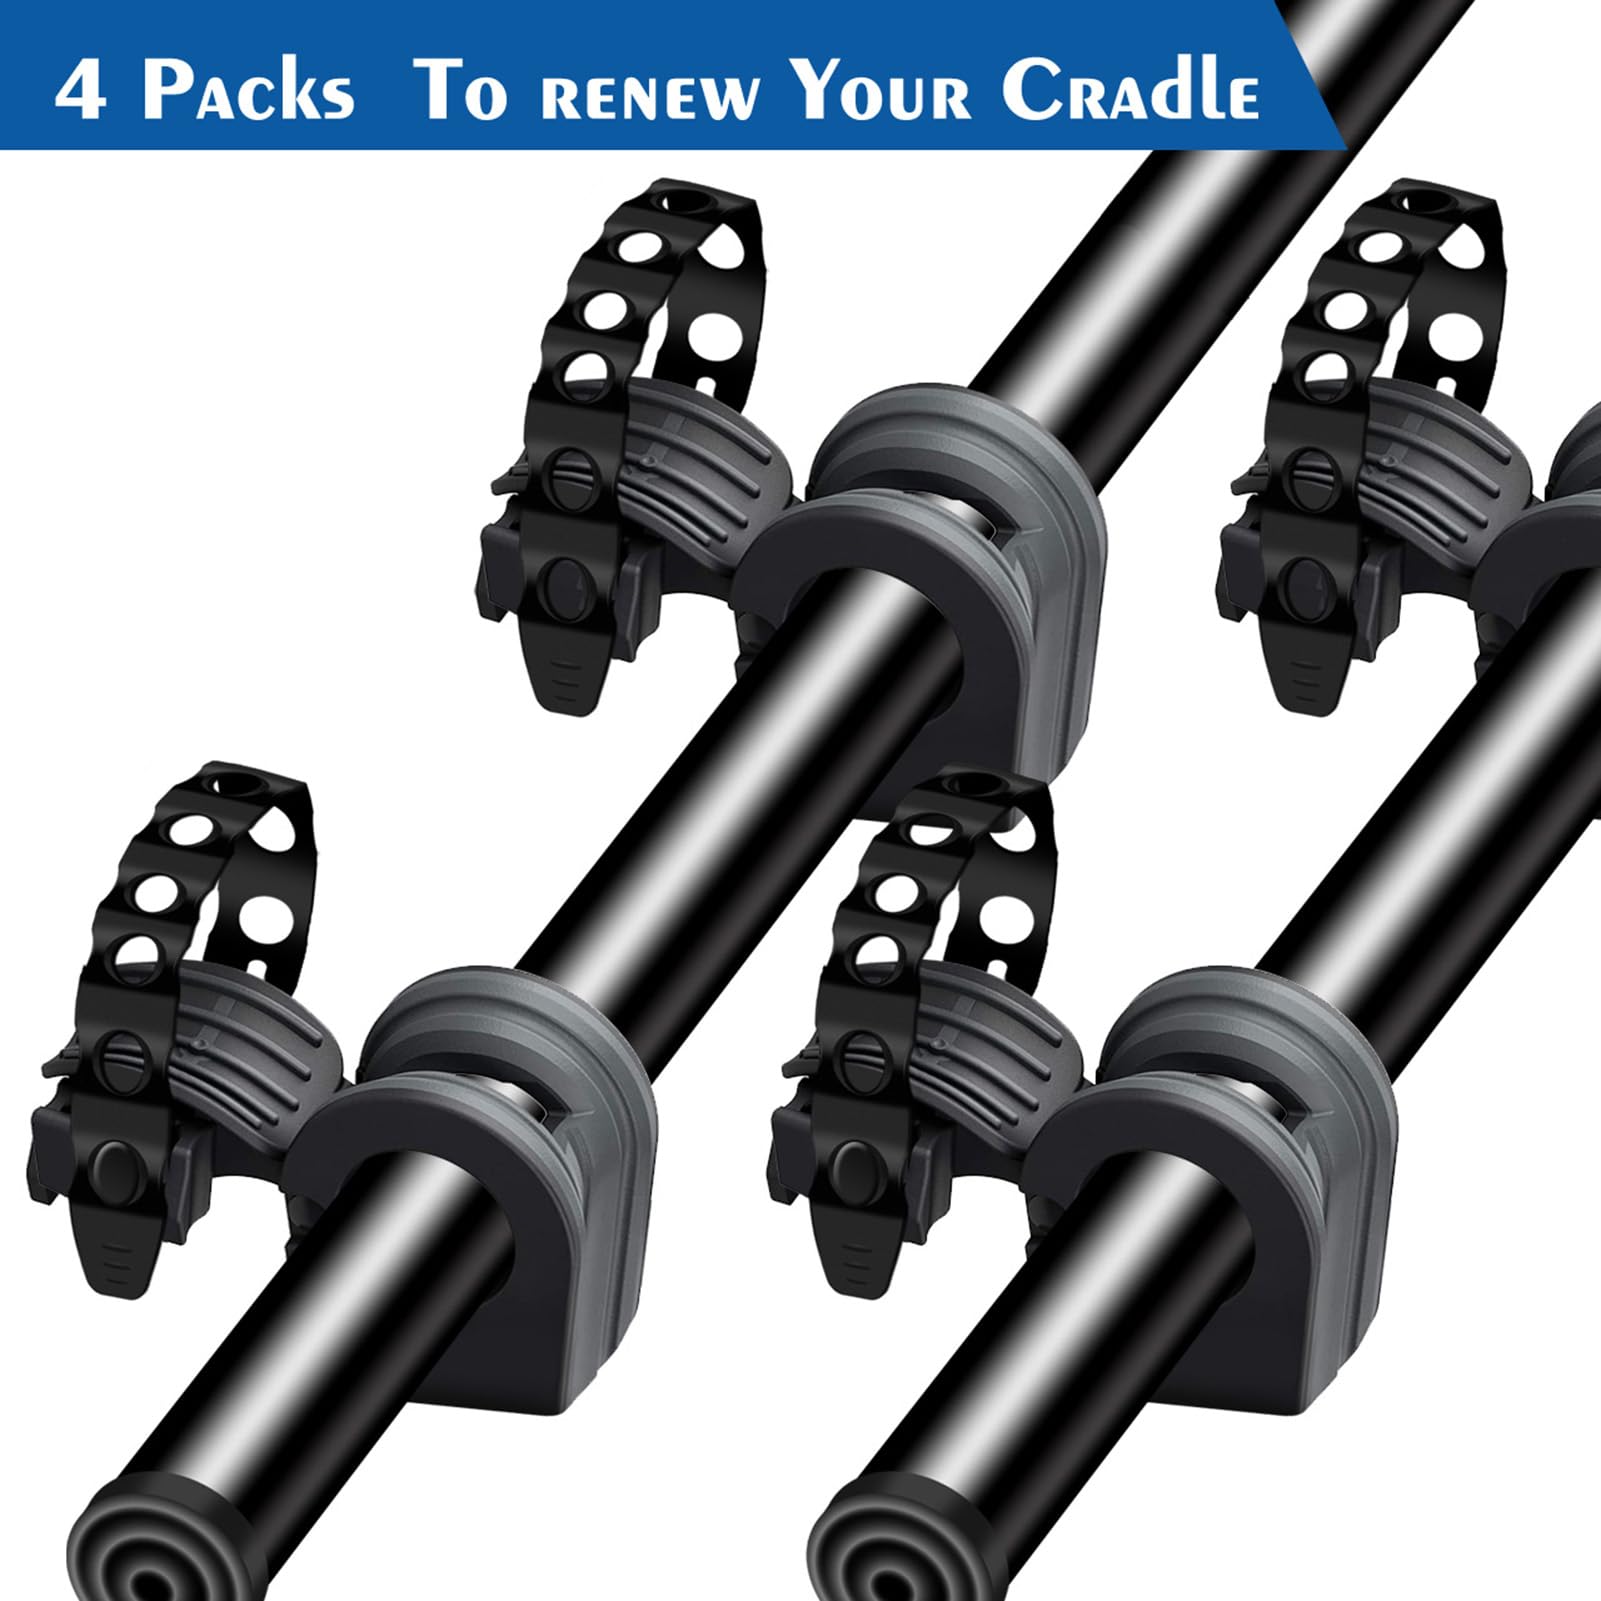 Bike Rack Strap, Bike Wheel Stabilizer Straps, Replacement Rubber Straps Accessory Strap Kit, Adjustable, Bicycle Wheel Stabilizer Straps 4 Pack Compatible with Thule 534